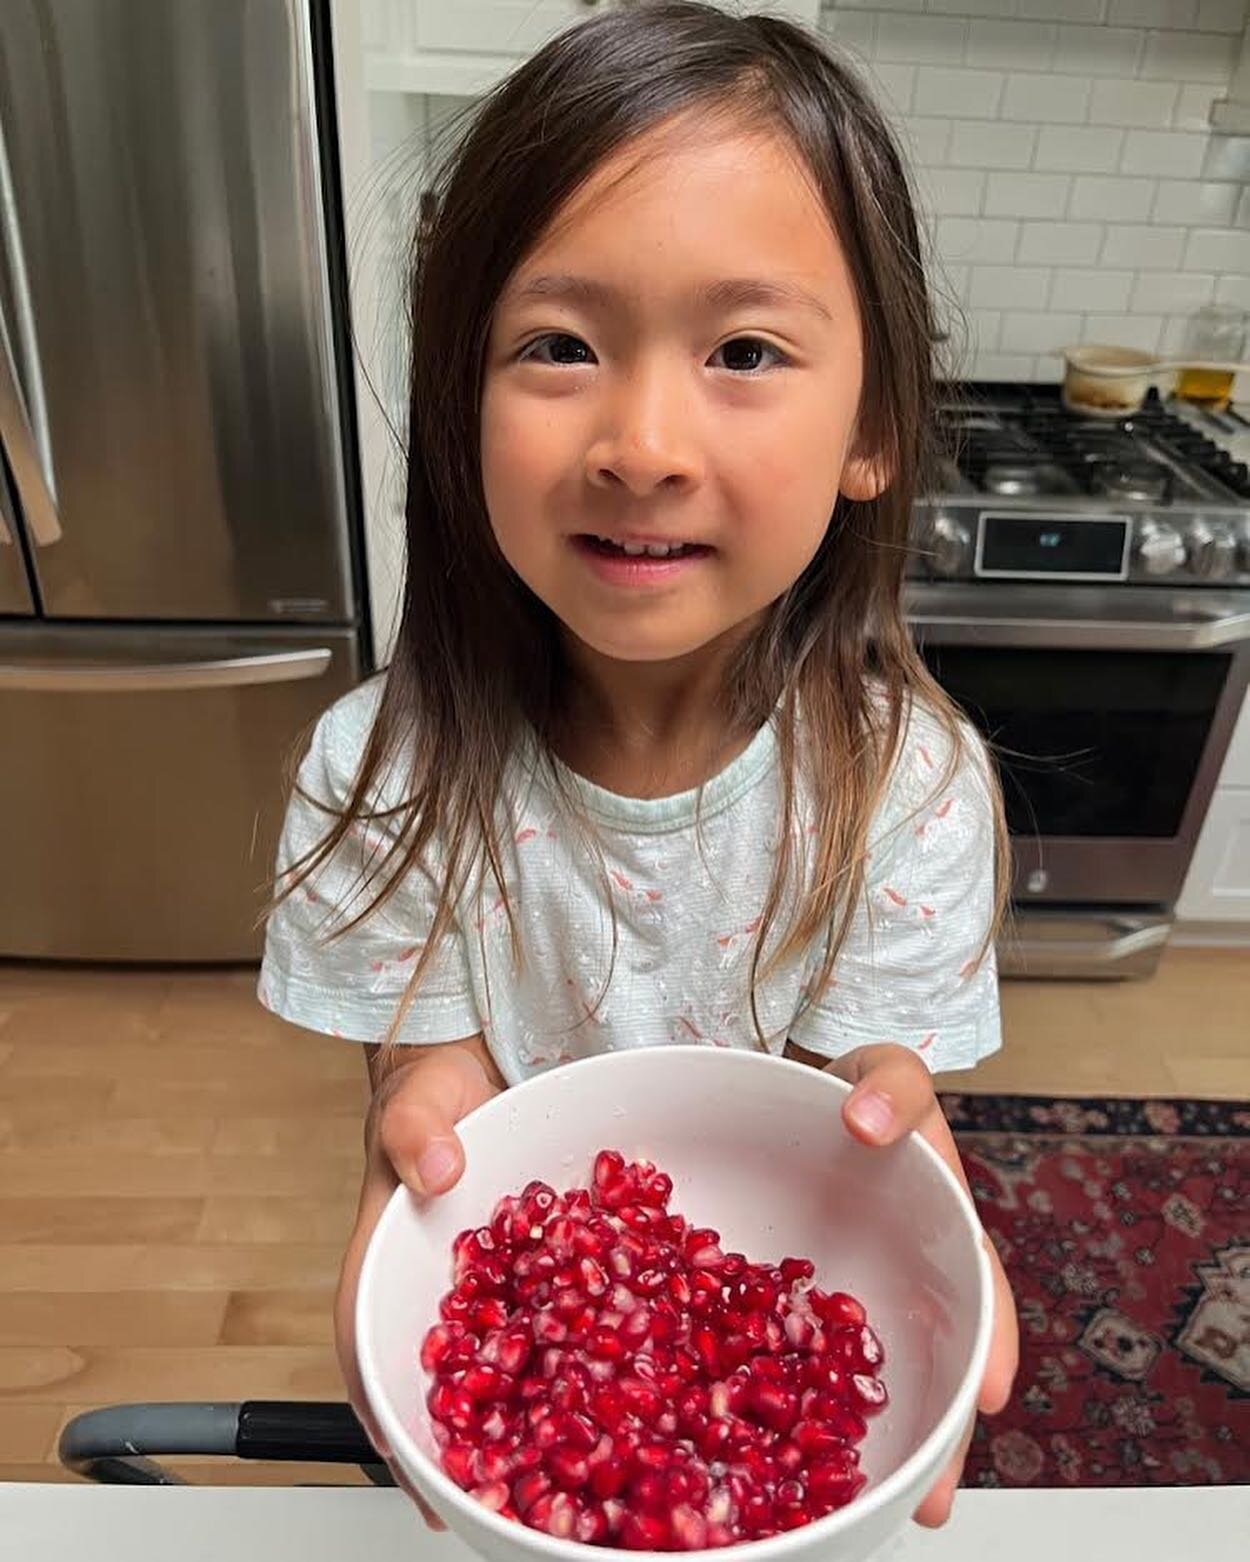 Gardening is community.
One of the joys of growing food is being able to share.  We gave our neighbor some of our pomegranate and look what we got back!